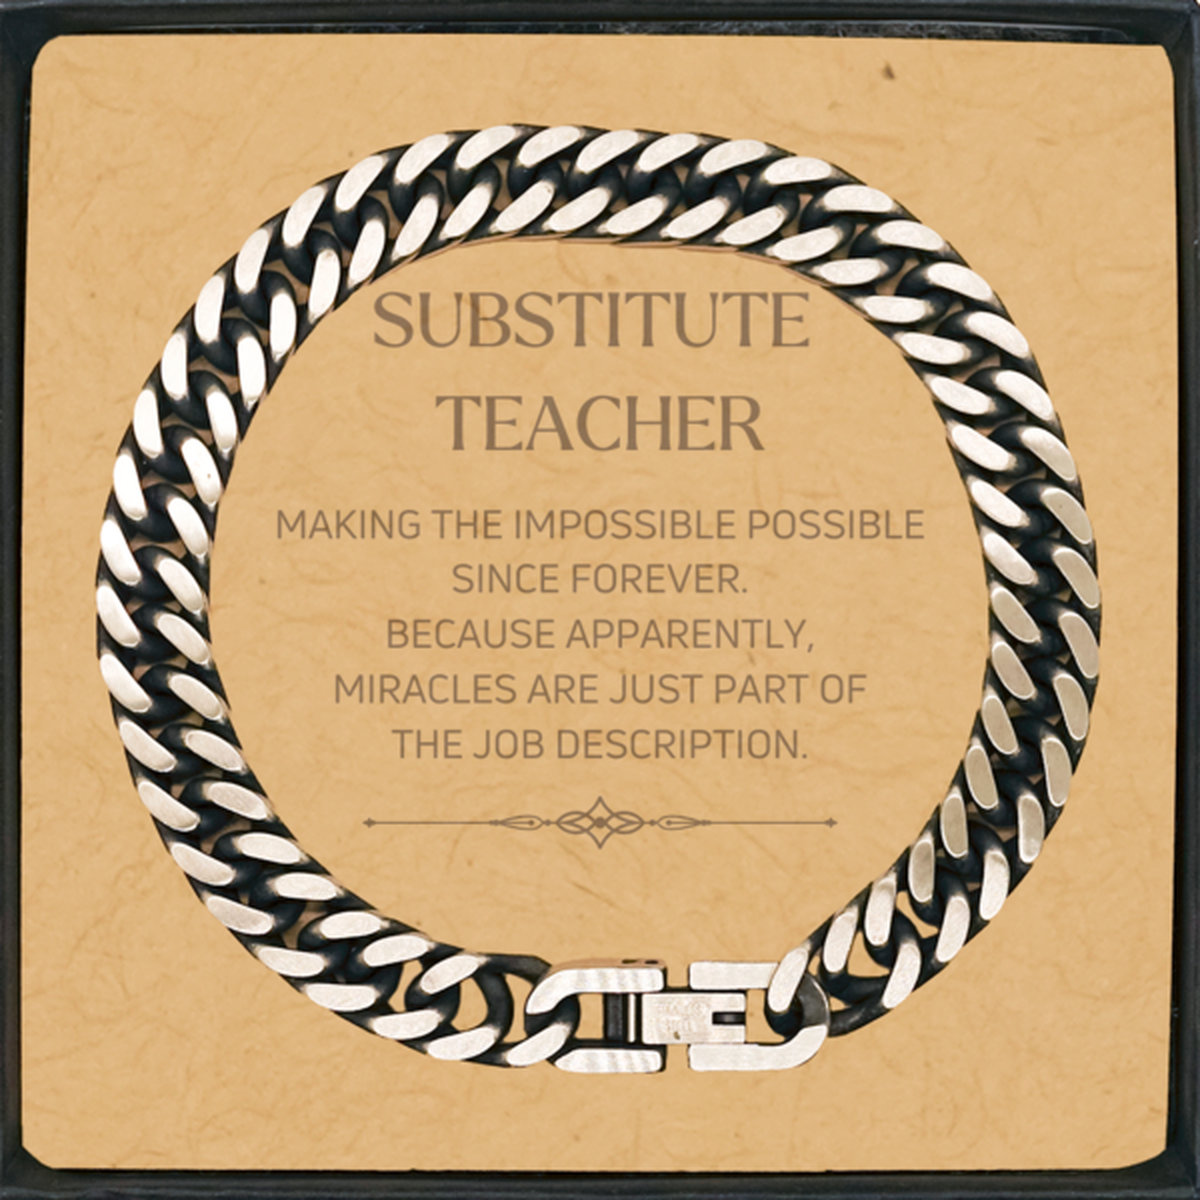 Funny Substitute Teacher Gifts, Miracles are just part of the job description, Inspirational Birthday Cuban Link Chain Bracelet For Substitute Teacher, Men, Women, Coworkers, Friends, Boss